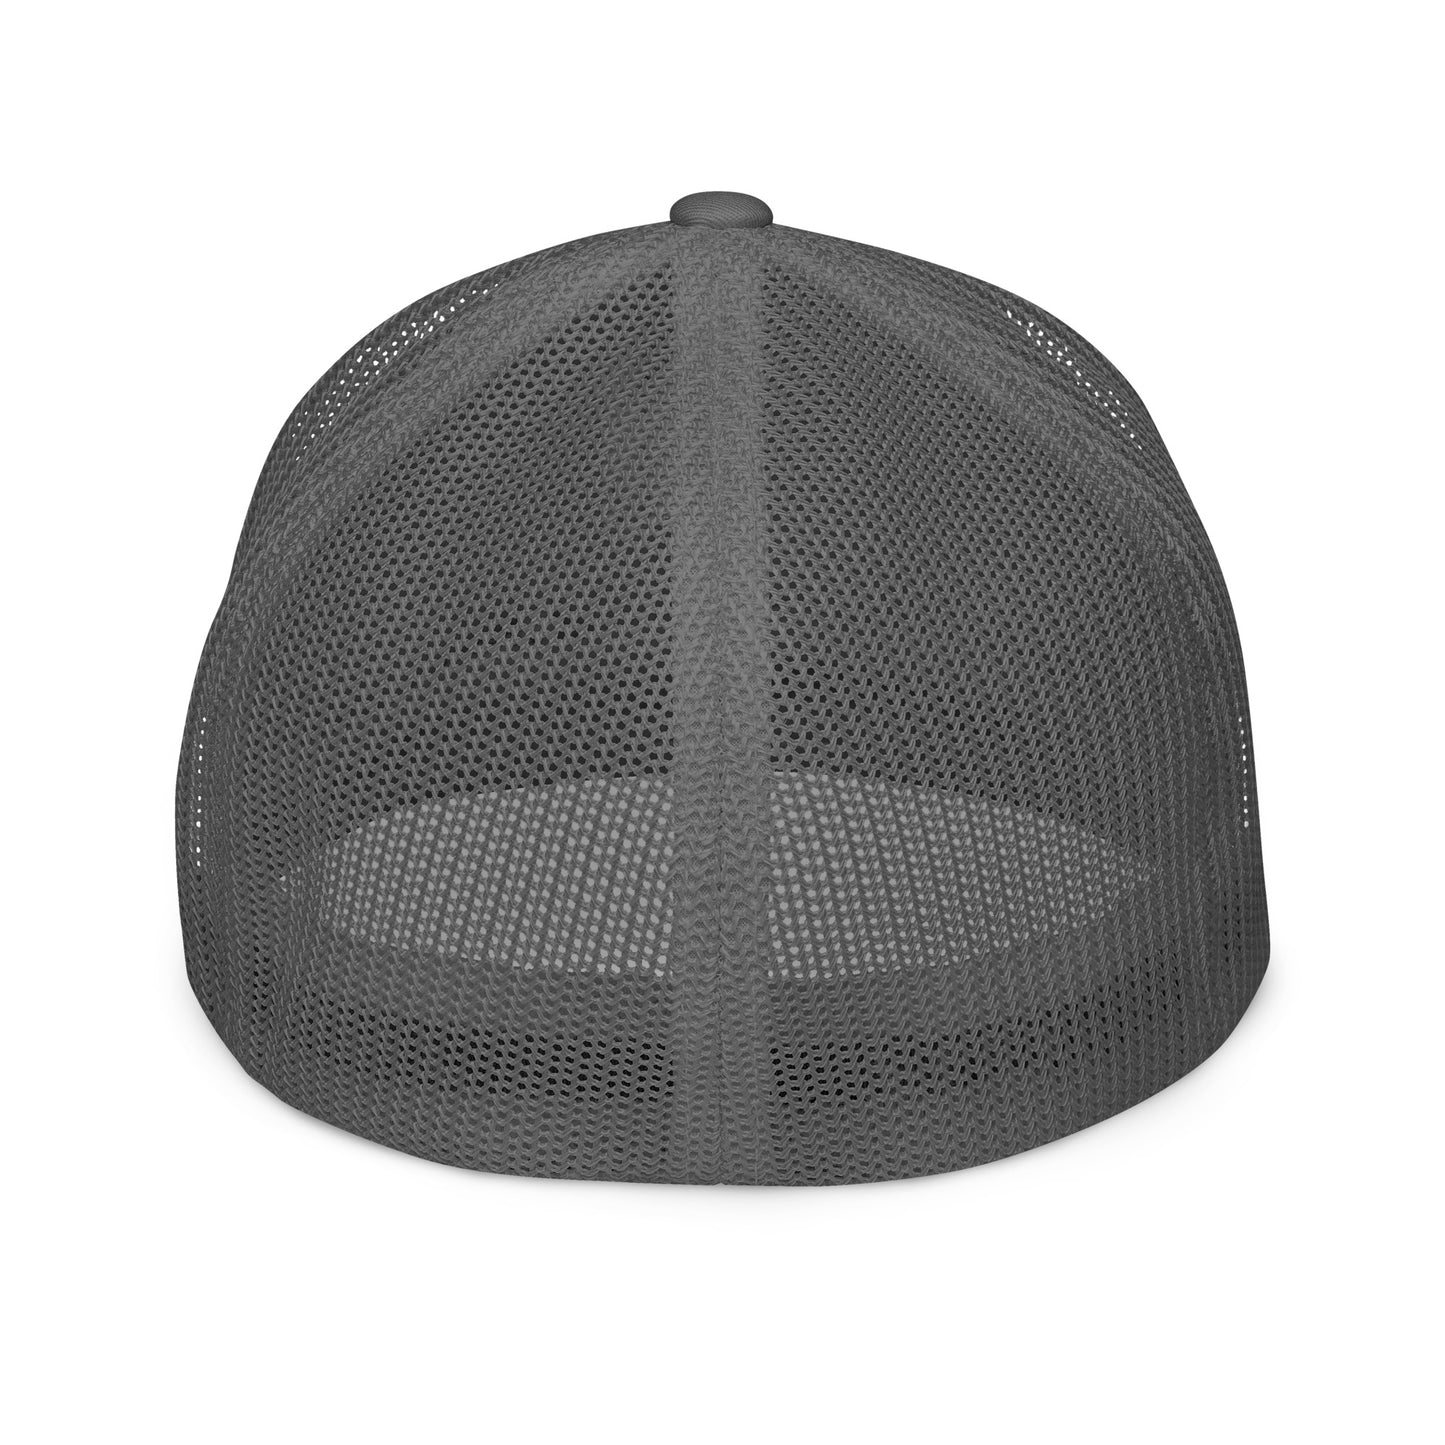 M*VE Mesh Fitted Hat